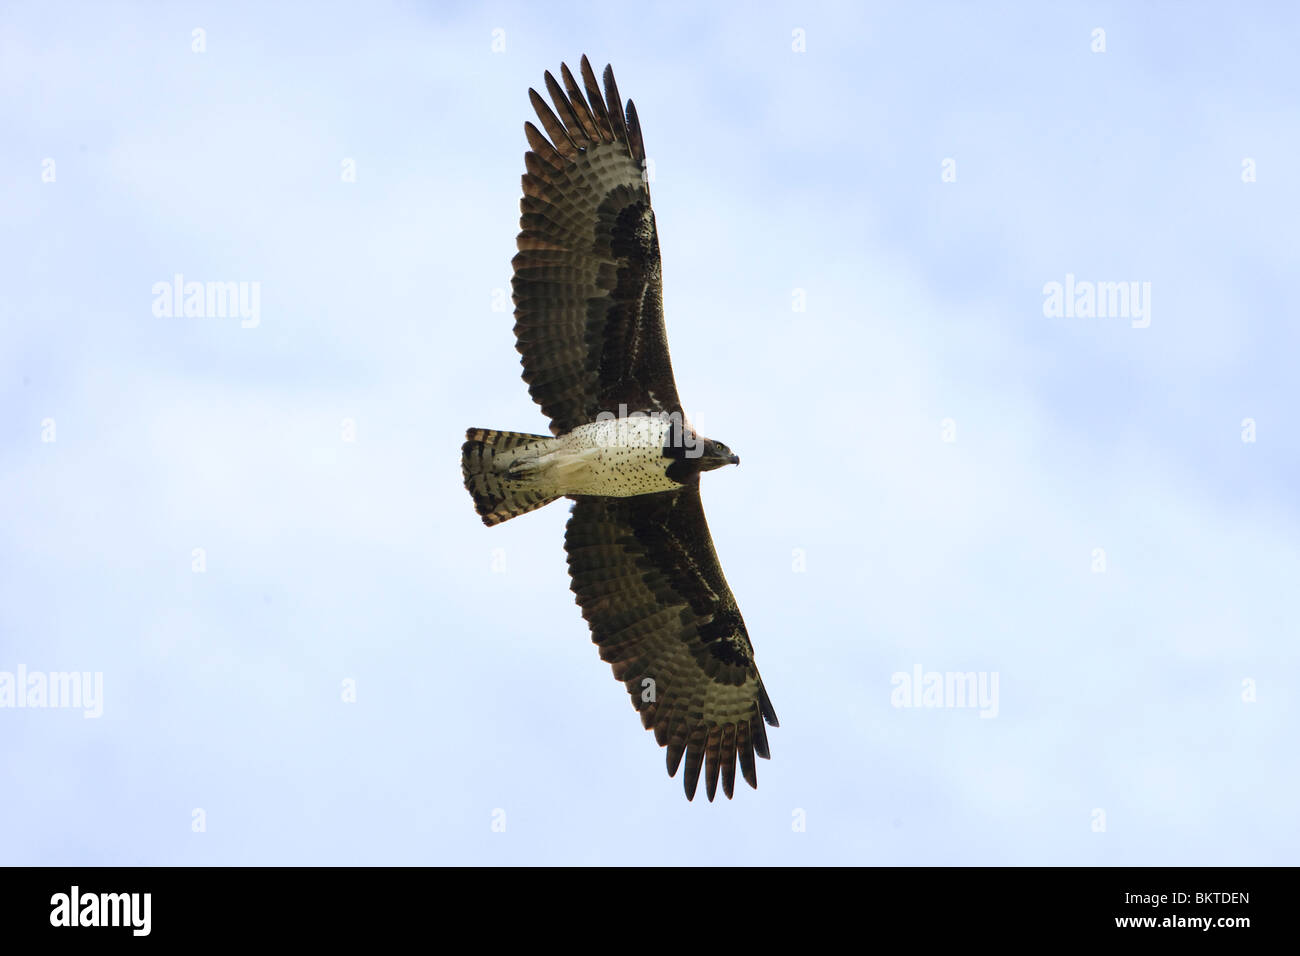 Adulte vechtarend vliegend, Flying adutl Martial Eagle Stock Photo